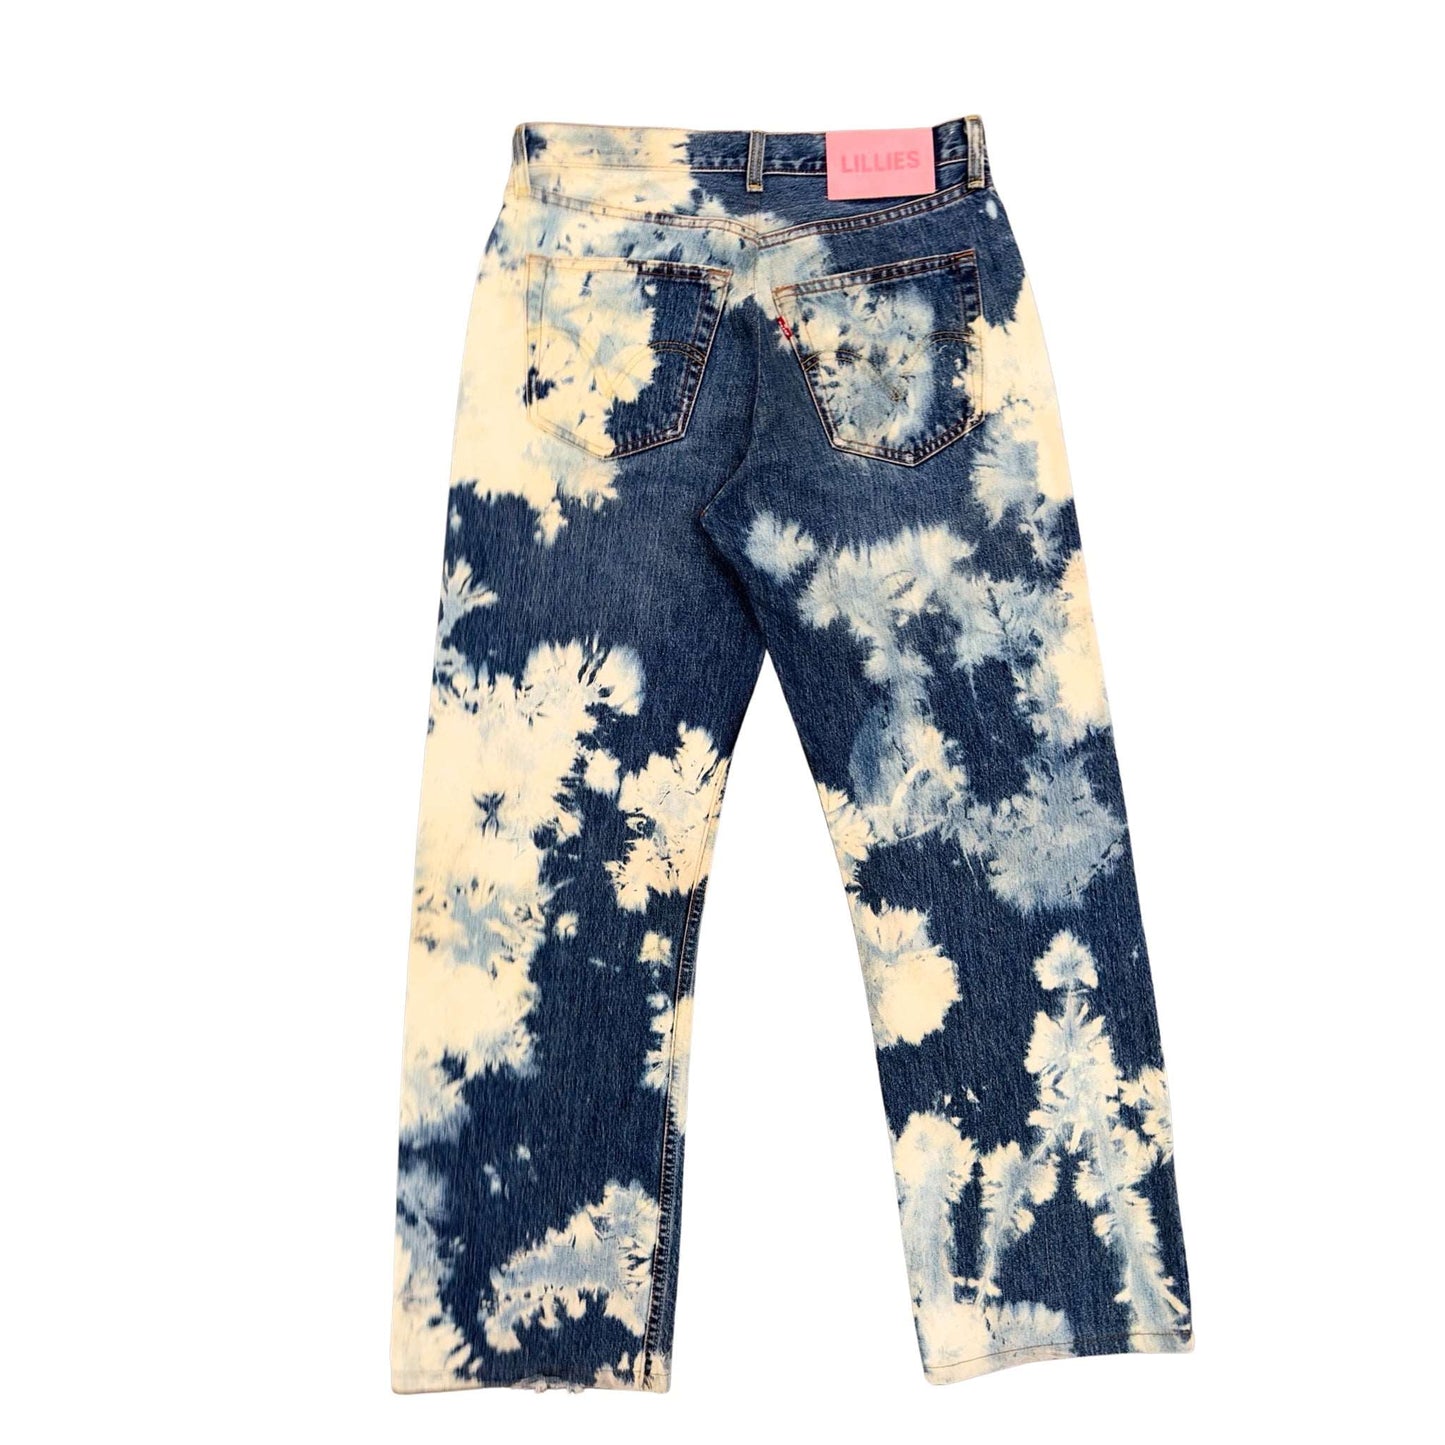 The Frost Jeans are a pair of classic blue, vintage wide leg jeans that have been hand-bleached using a unique technique giving the jean an appearance of frost.